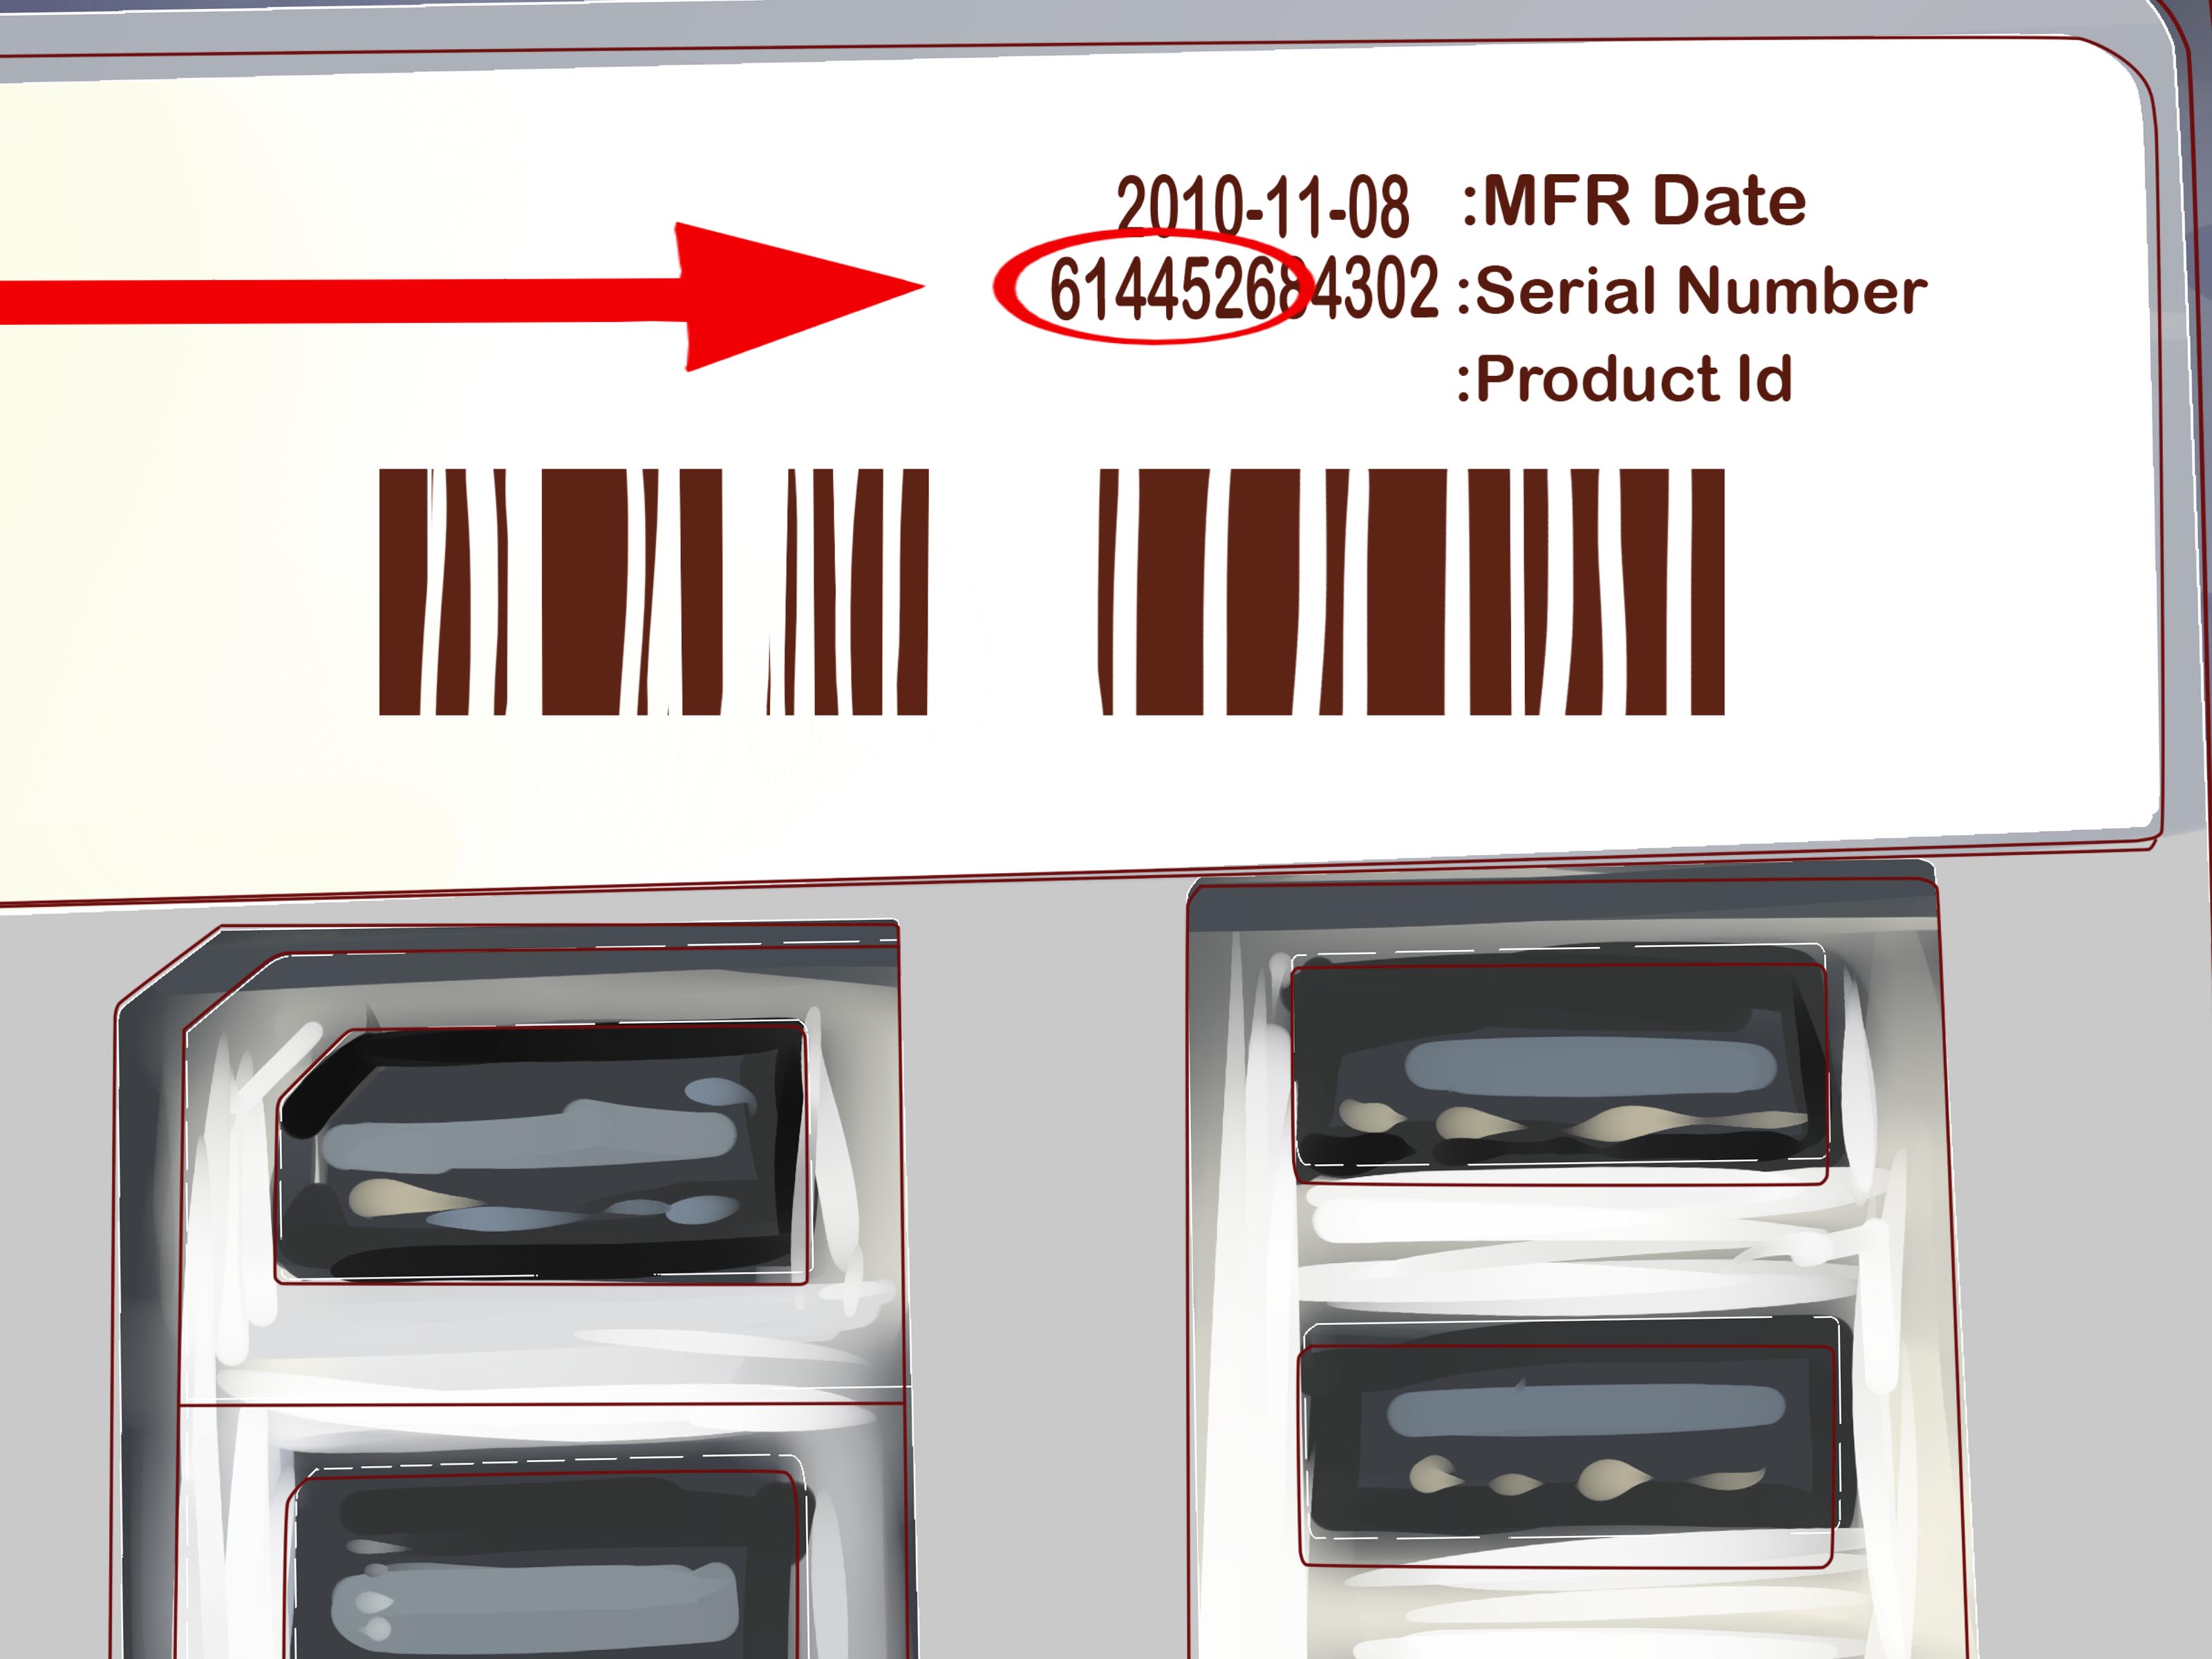 Xbox one serial numbers